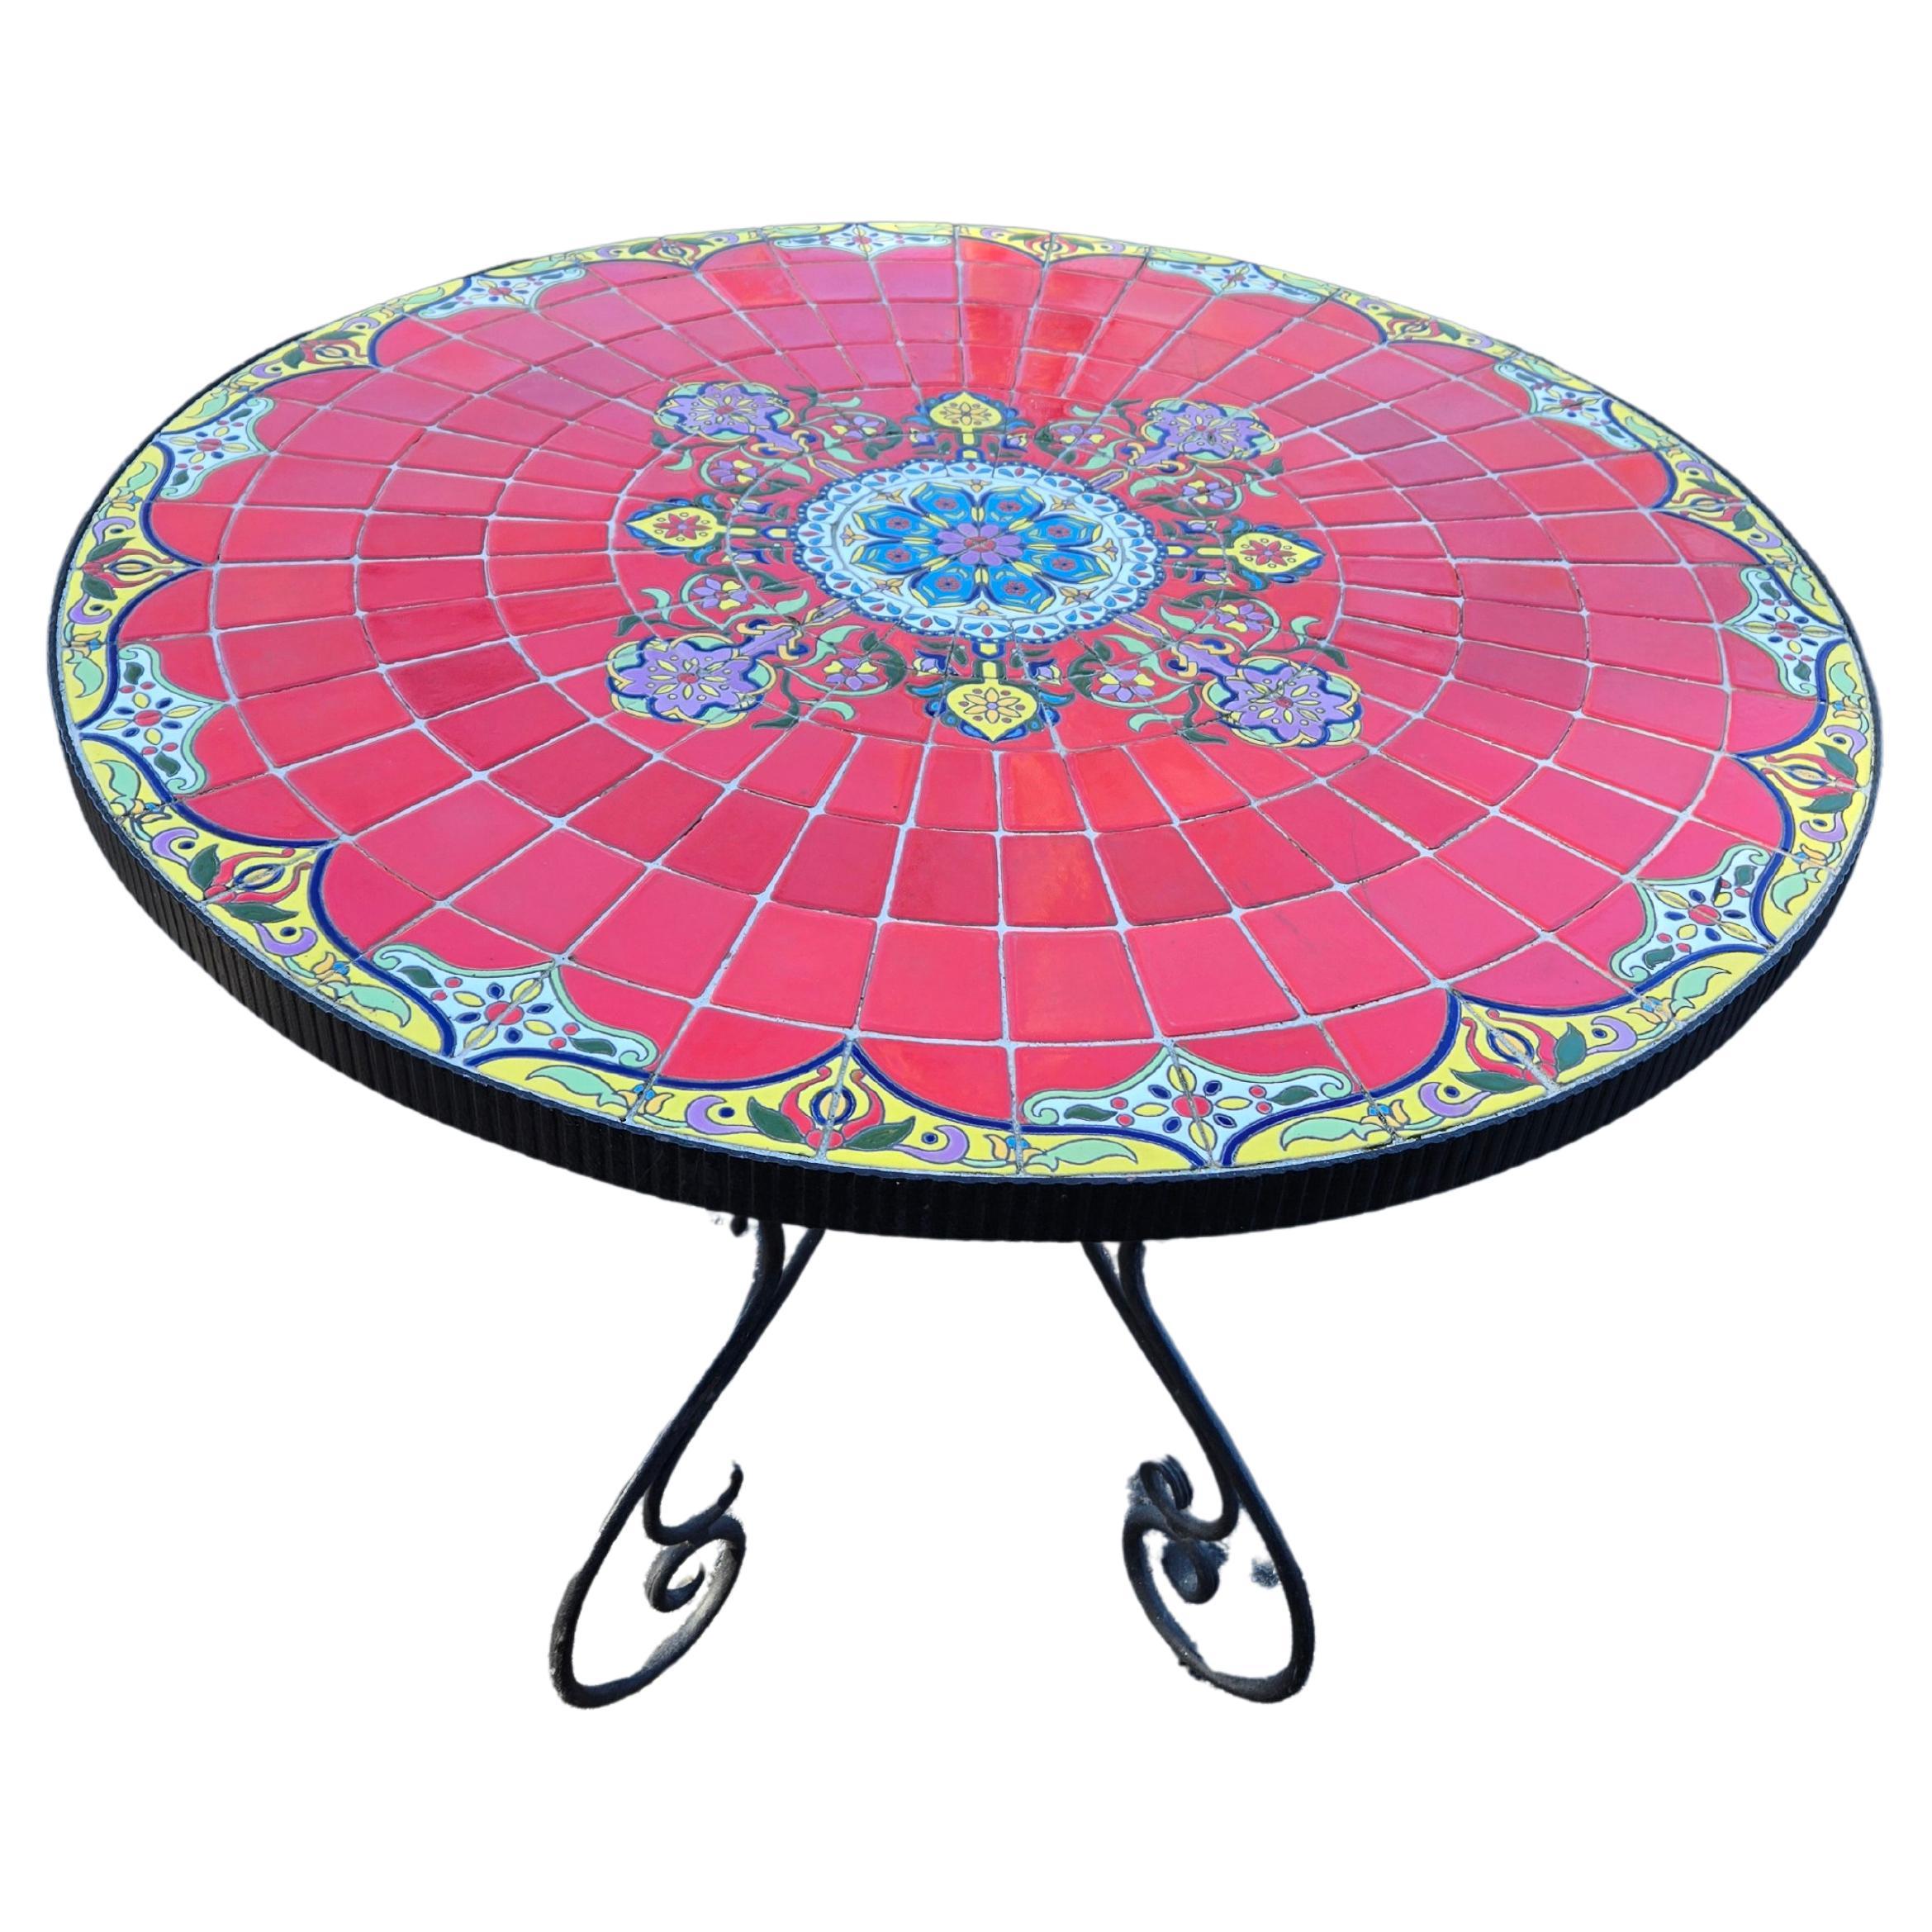 Mosaic Tile Table with Iron Base For Sale